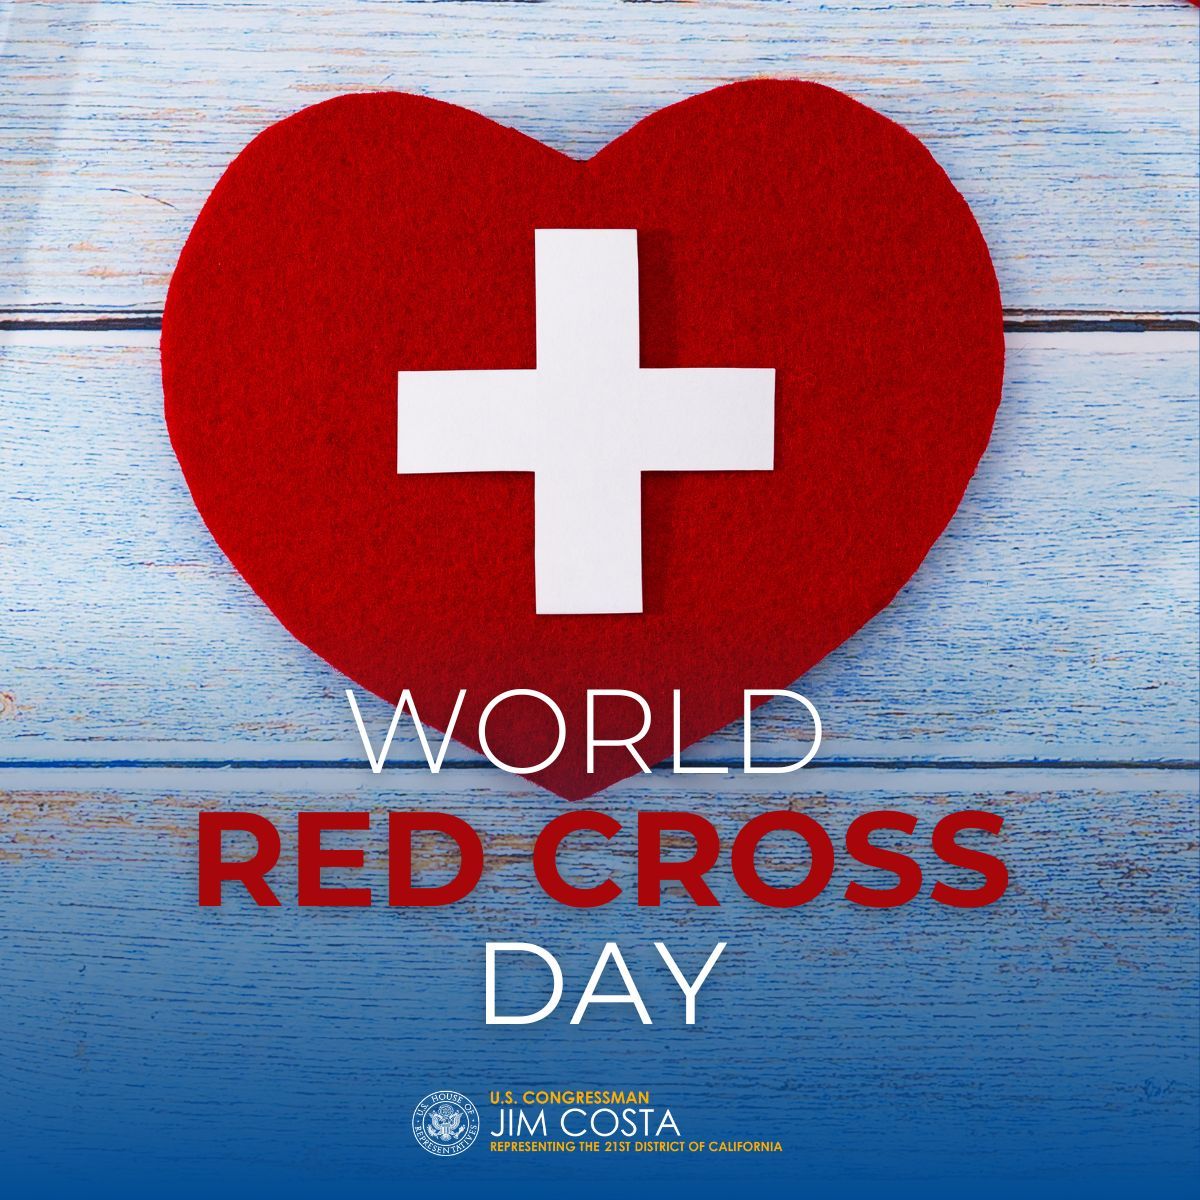 This World Red Cross Day, let's appreciate the contributions of Red Cross in providing humanitarian aid to vulnerable populations across the globe. Their tireless efforts embody the spirit of compassion and solidarity, bringing support to those experiencing unimaginable hardship.